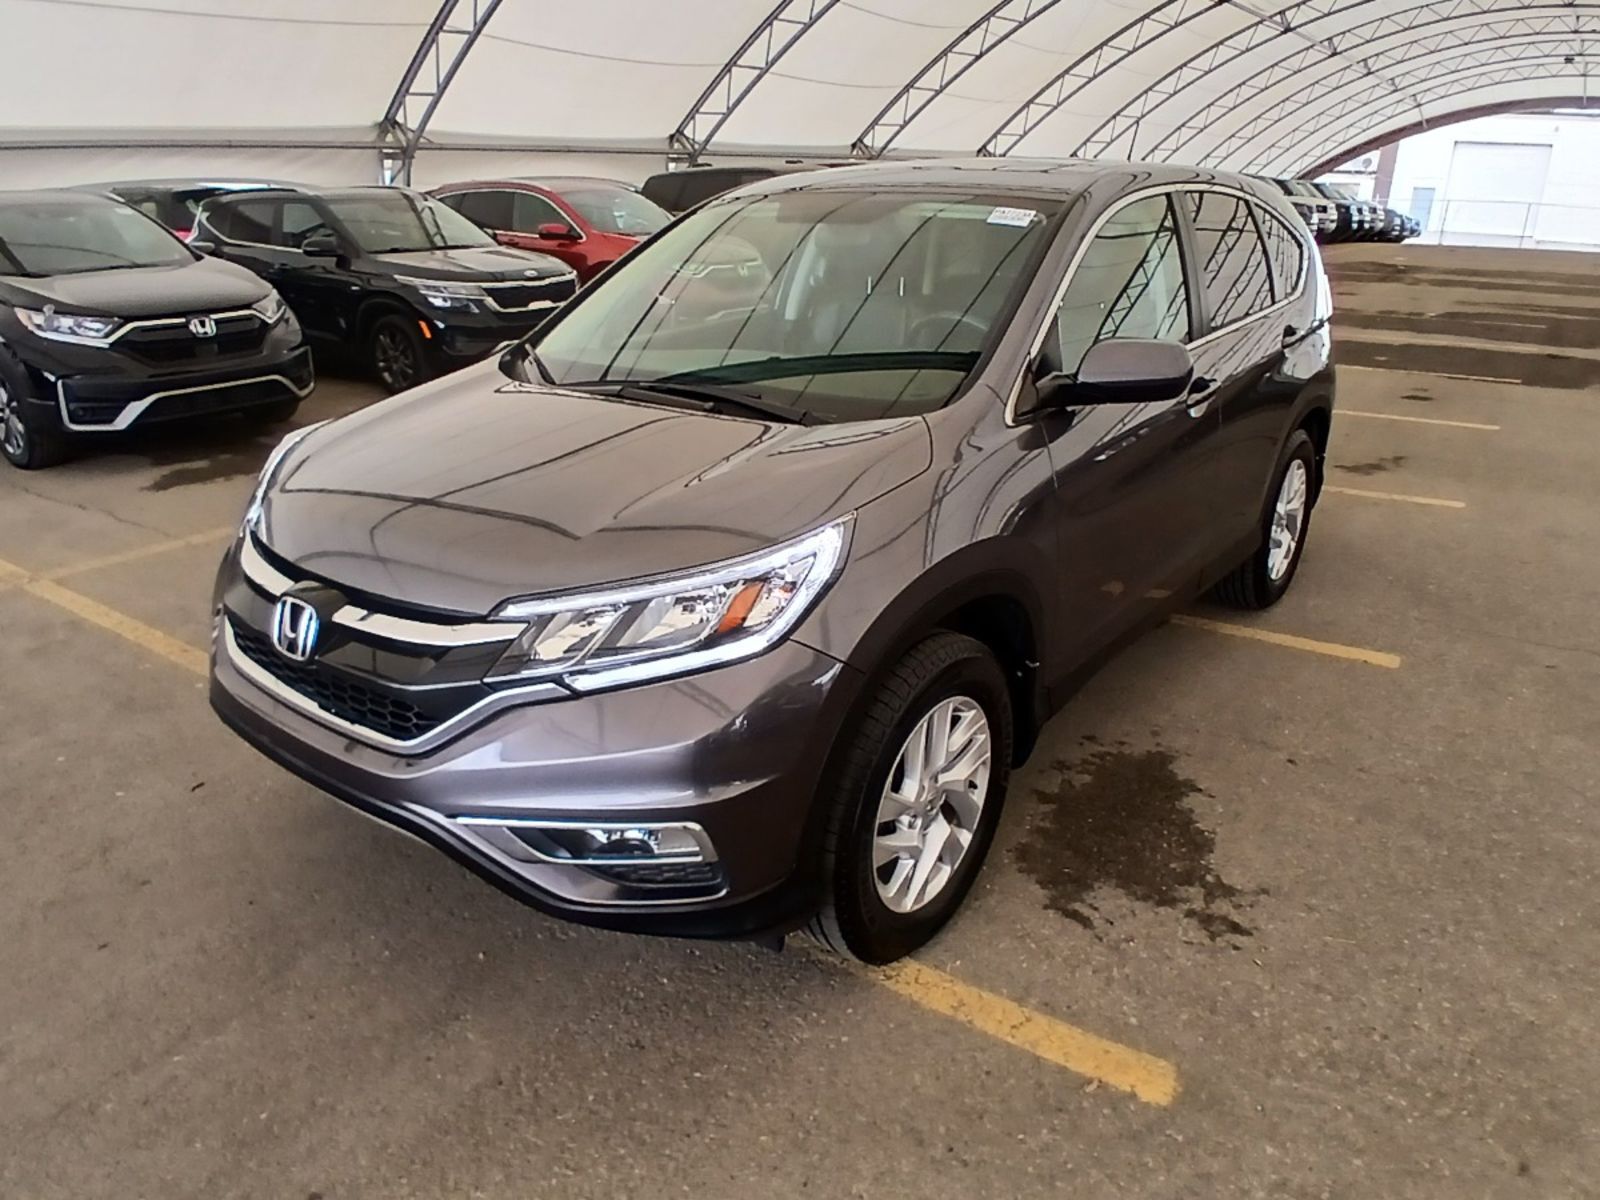 2015 Honda CR-V EX-L - Sunroof | Leather | Heated Front Seats